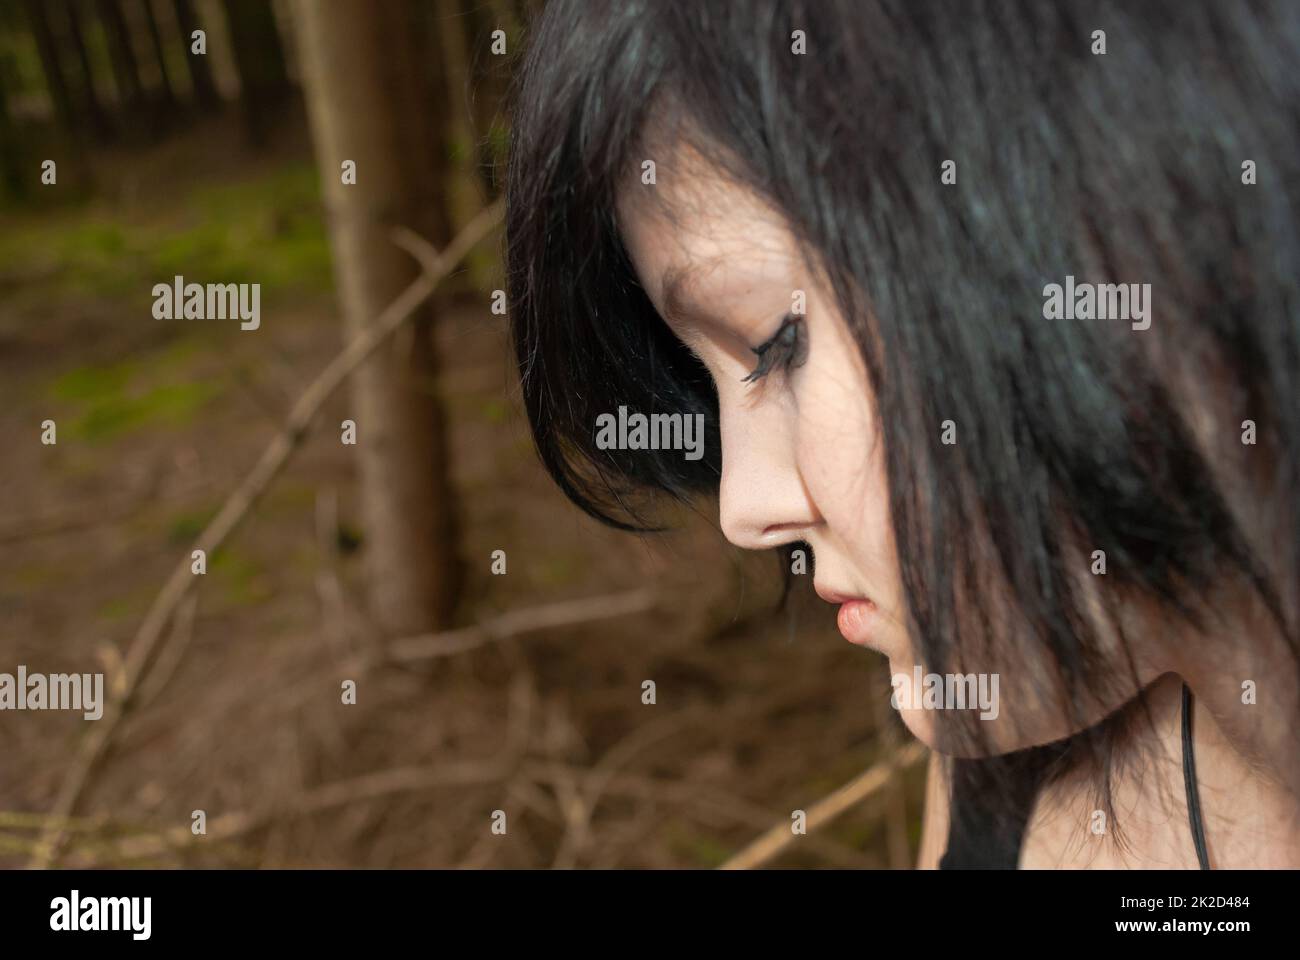 Punk emo girl, young adult with black hair and eyeliner, close-up Stock Photo